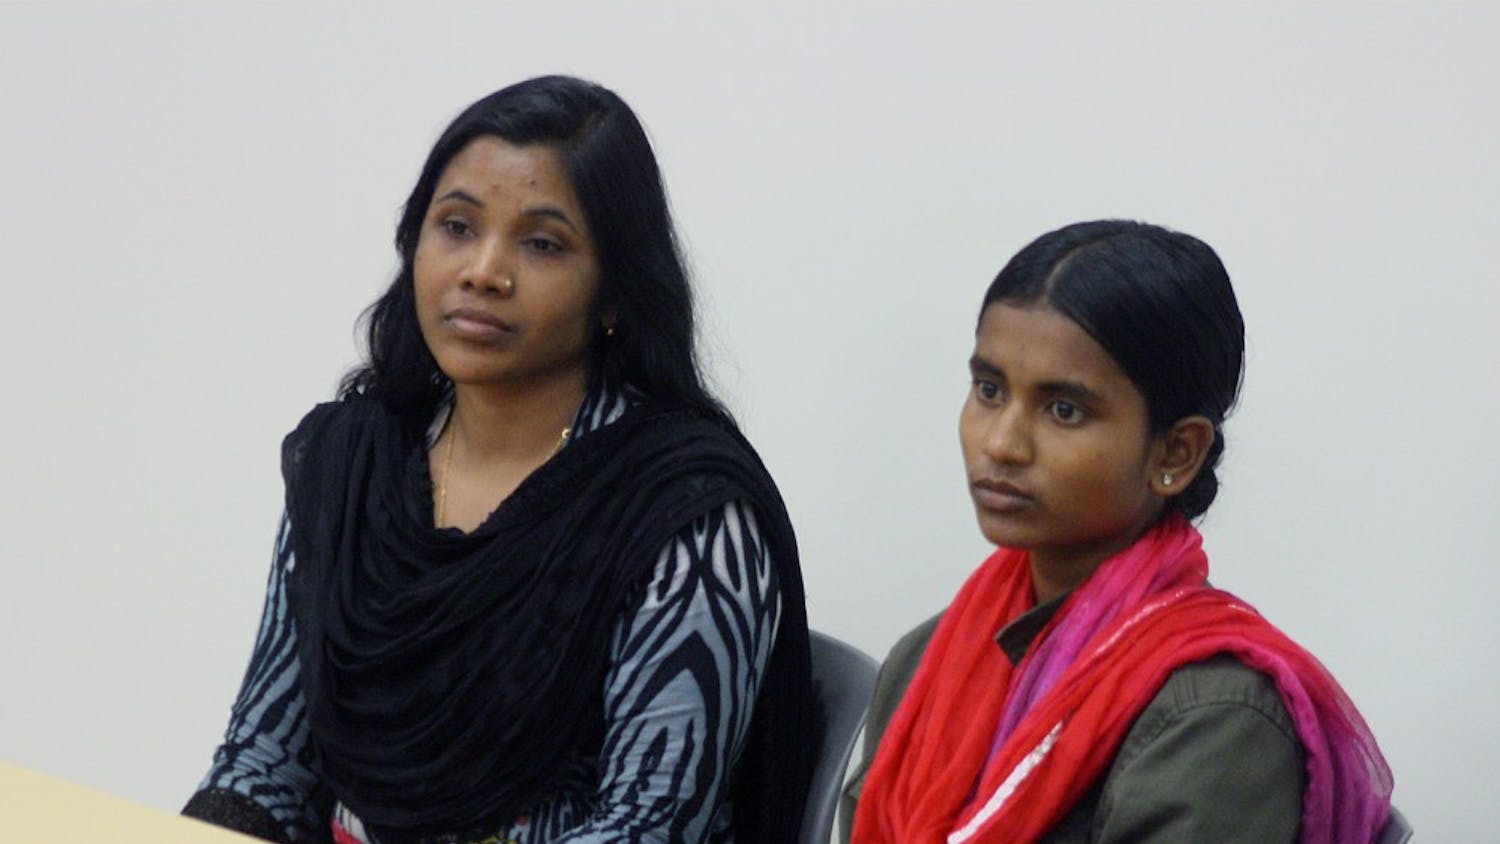 The Student Action with workers invited two Bangladeshi workers to speak in the Union. These two have traveled across the country to at least 18 different schools in order to advocate the end of harmful environments for workers in factories. Aleya Akter (left) and Aklima Khanam (right) along with their translator. 